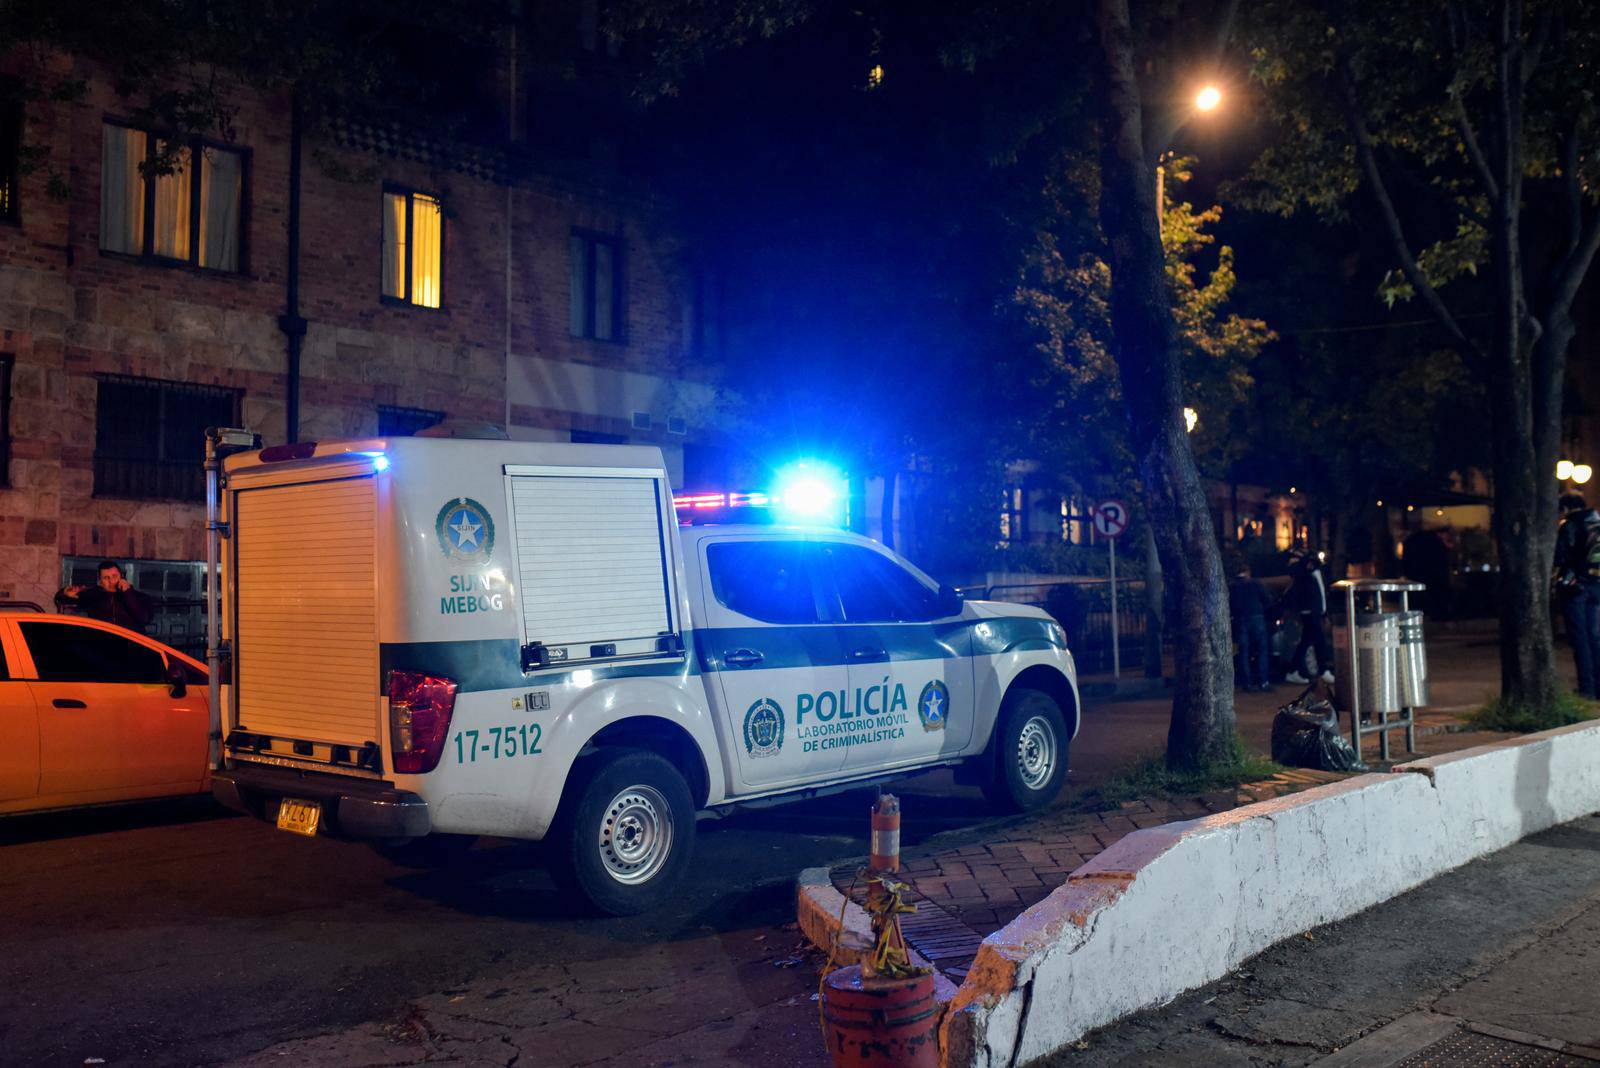 A police van is seen outside the Casa Medina hotel, where Taylor Hawkins, drummer of the band Foo Fighters was staying, who died hours before his presentation at the Estereo Picnic festival, in Bogota